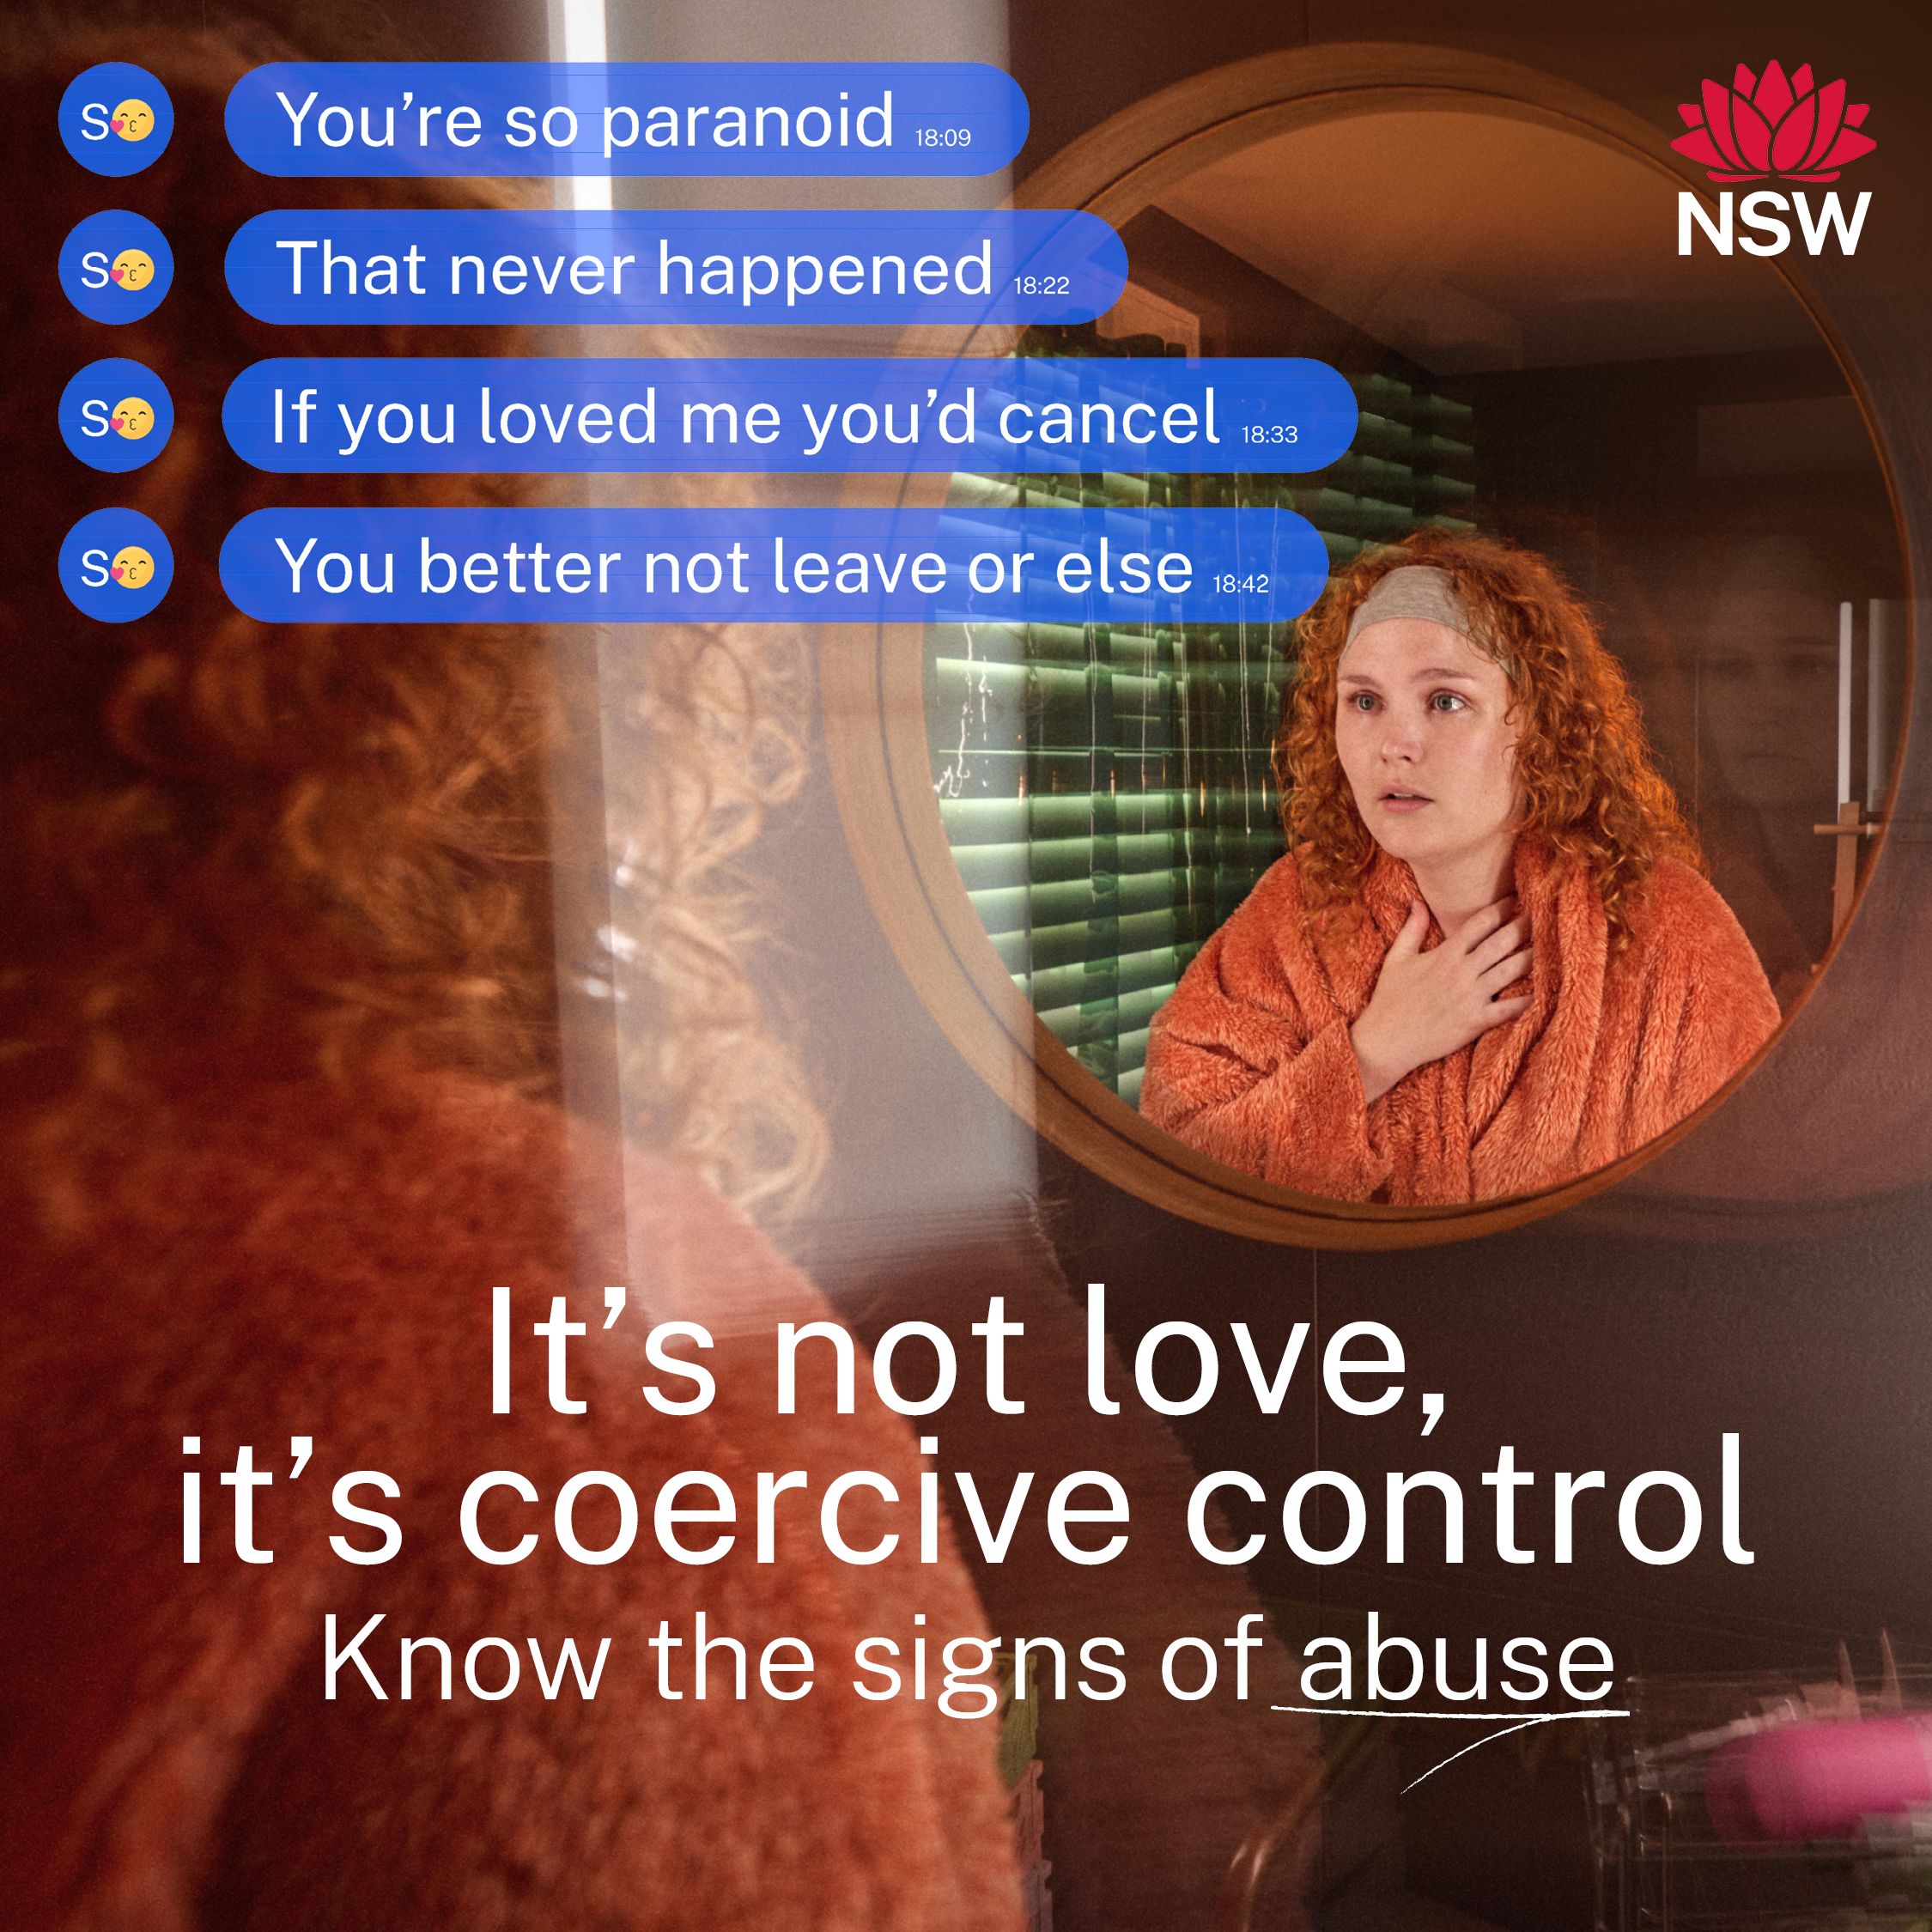 'it's not love': campaign to educate public on signs of coercive control